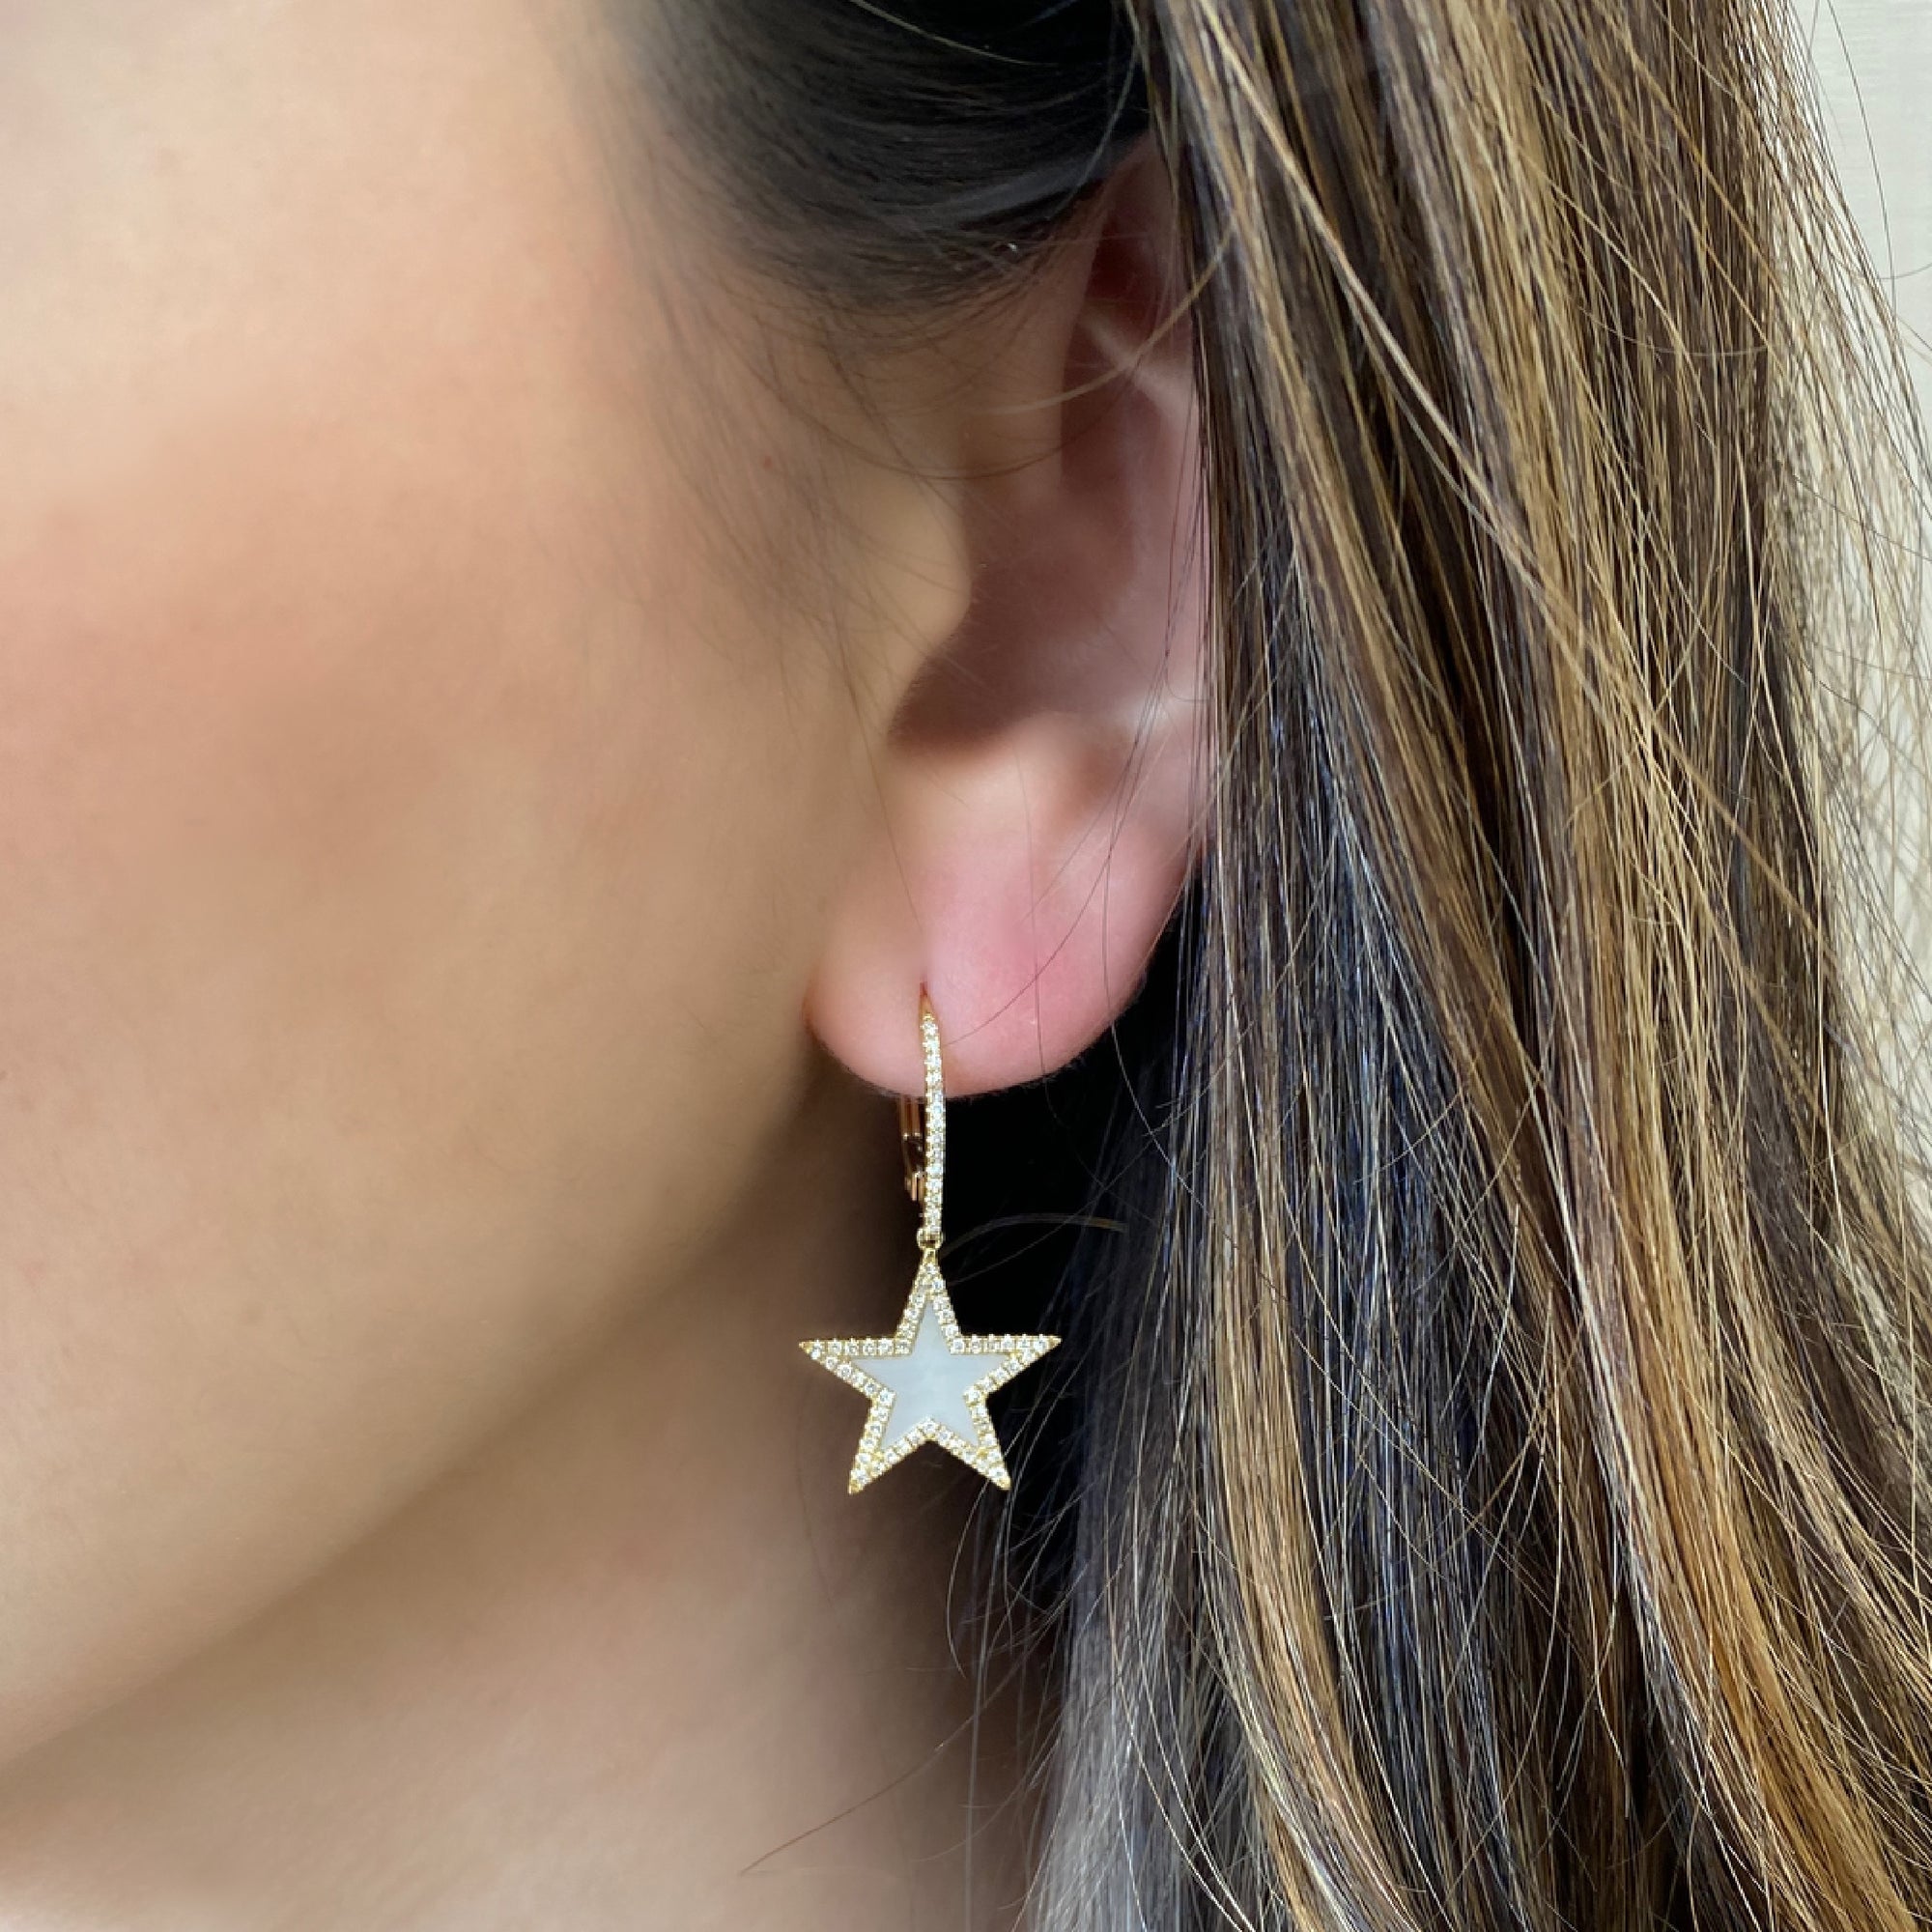 Mother of Pearl & Diamond Star Lever-Back Earrings  -14K gold weighing 3.33 grams  -128 round diamonds totaling 0.35 carats  -2 Mother of Pearl totaling 0.83 carats